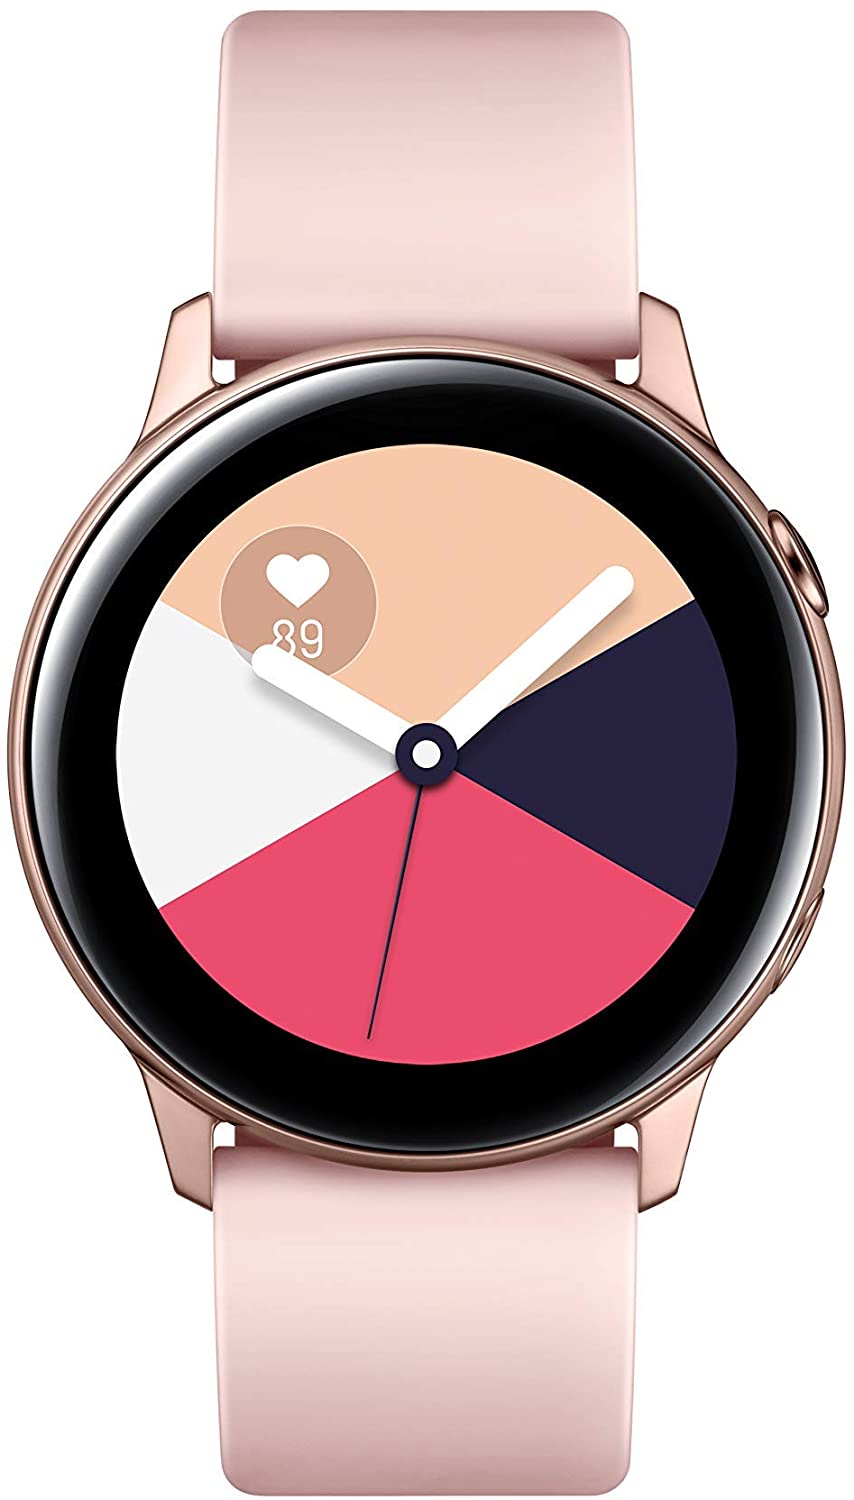 Samsung SM-R500NZDCXAR-RB Galaxy Watch Active 40mm Rose Gold - Certified Refurbished